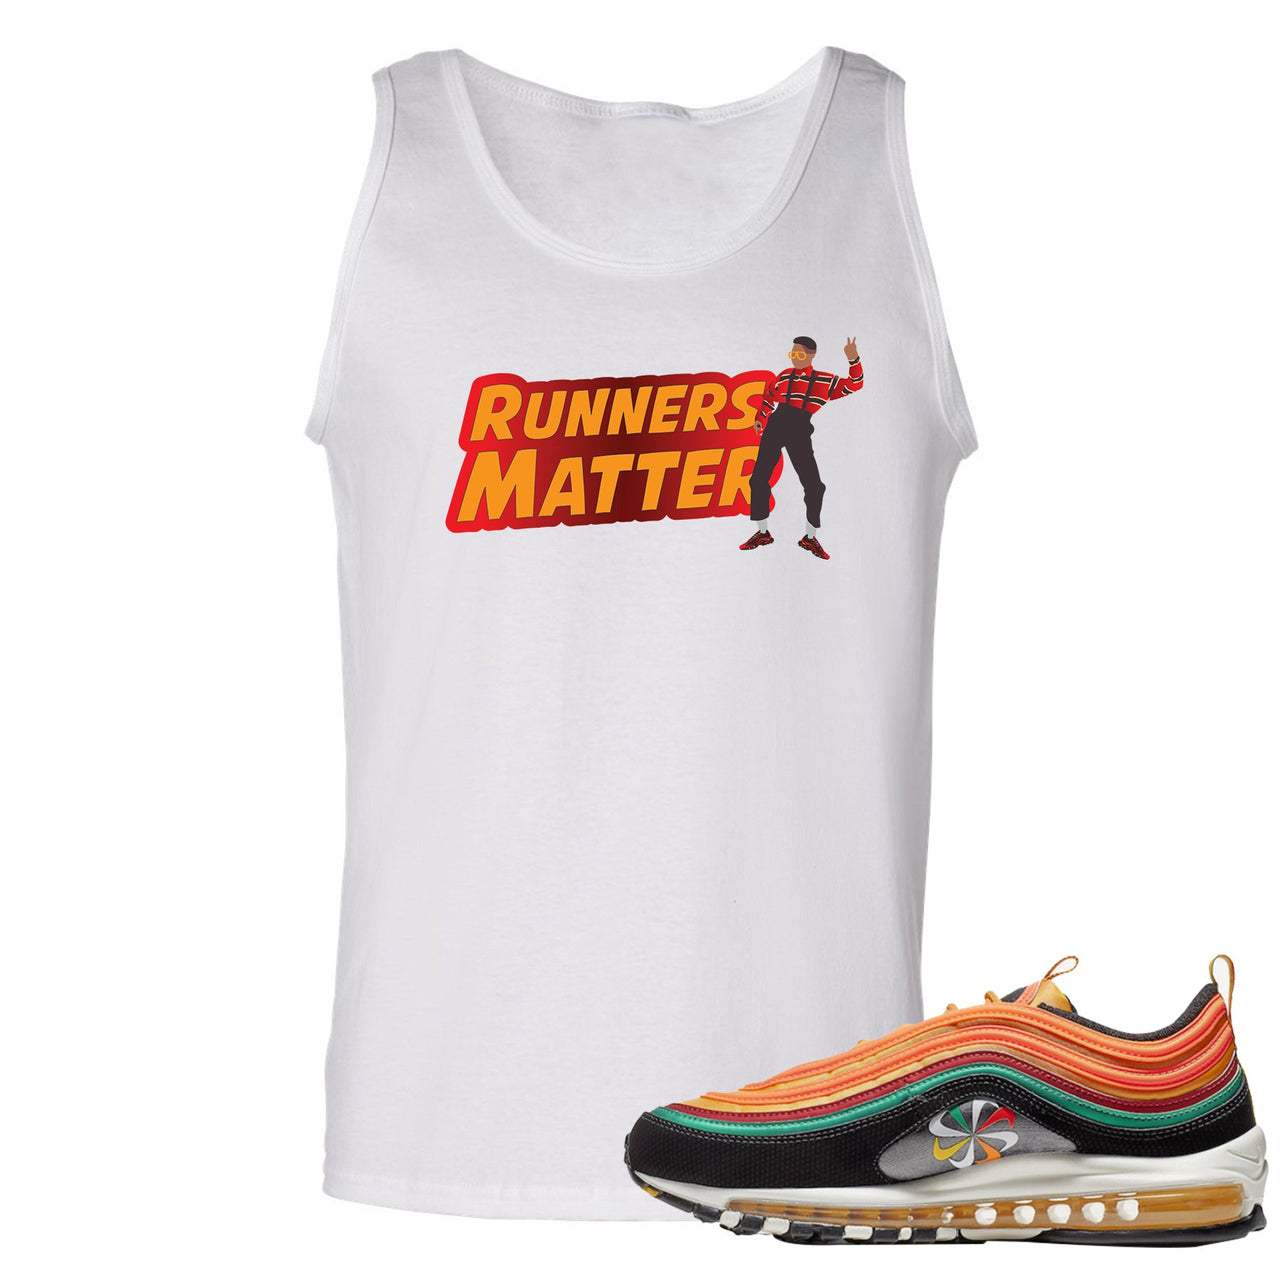 Printed on the front of the Air Max 97 Sunburst white sneaker matching tank top is the Runners Matter logo